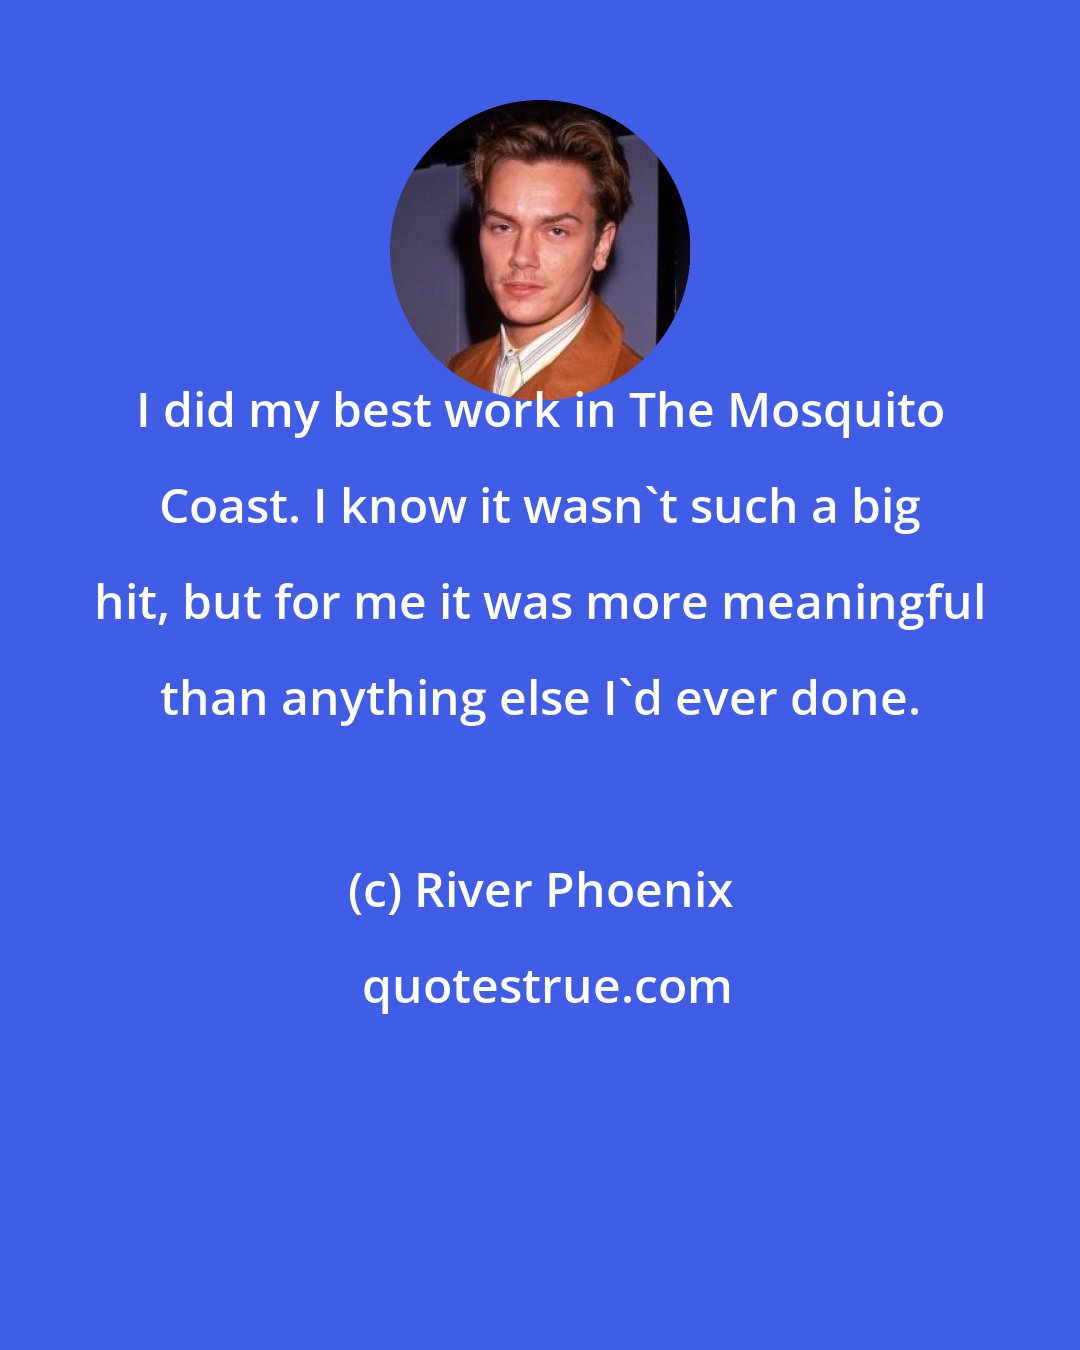 River Phoenix: I did my best work in The Mosquito Coast. I know it wasn't such a big hit, but for me it was more meaningful than anything else I'd ever done.